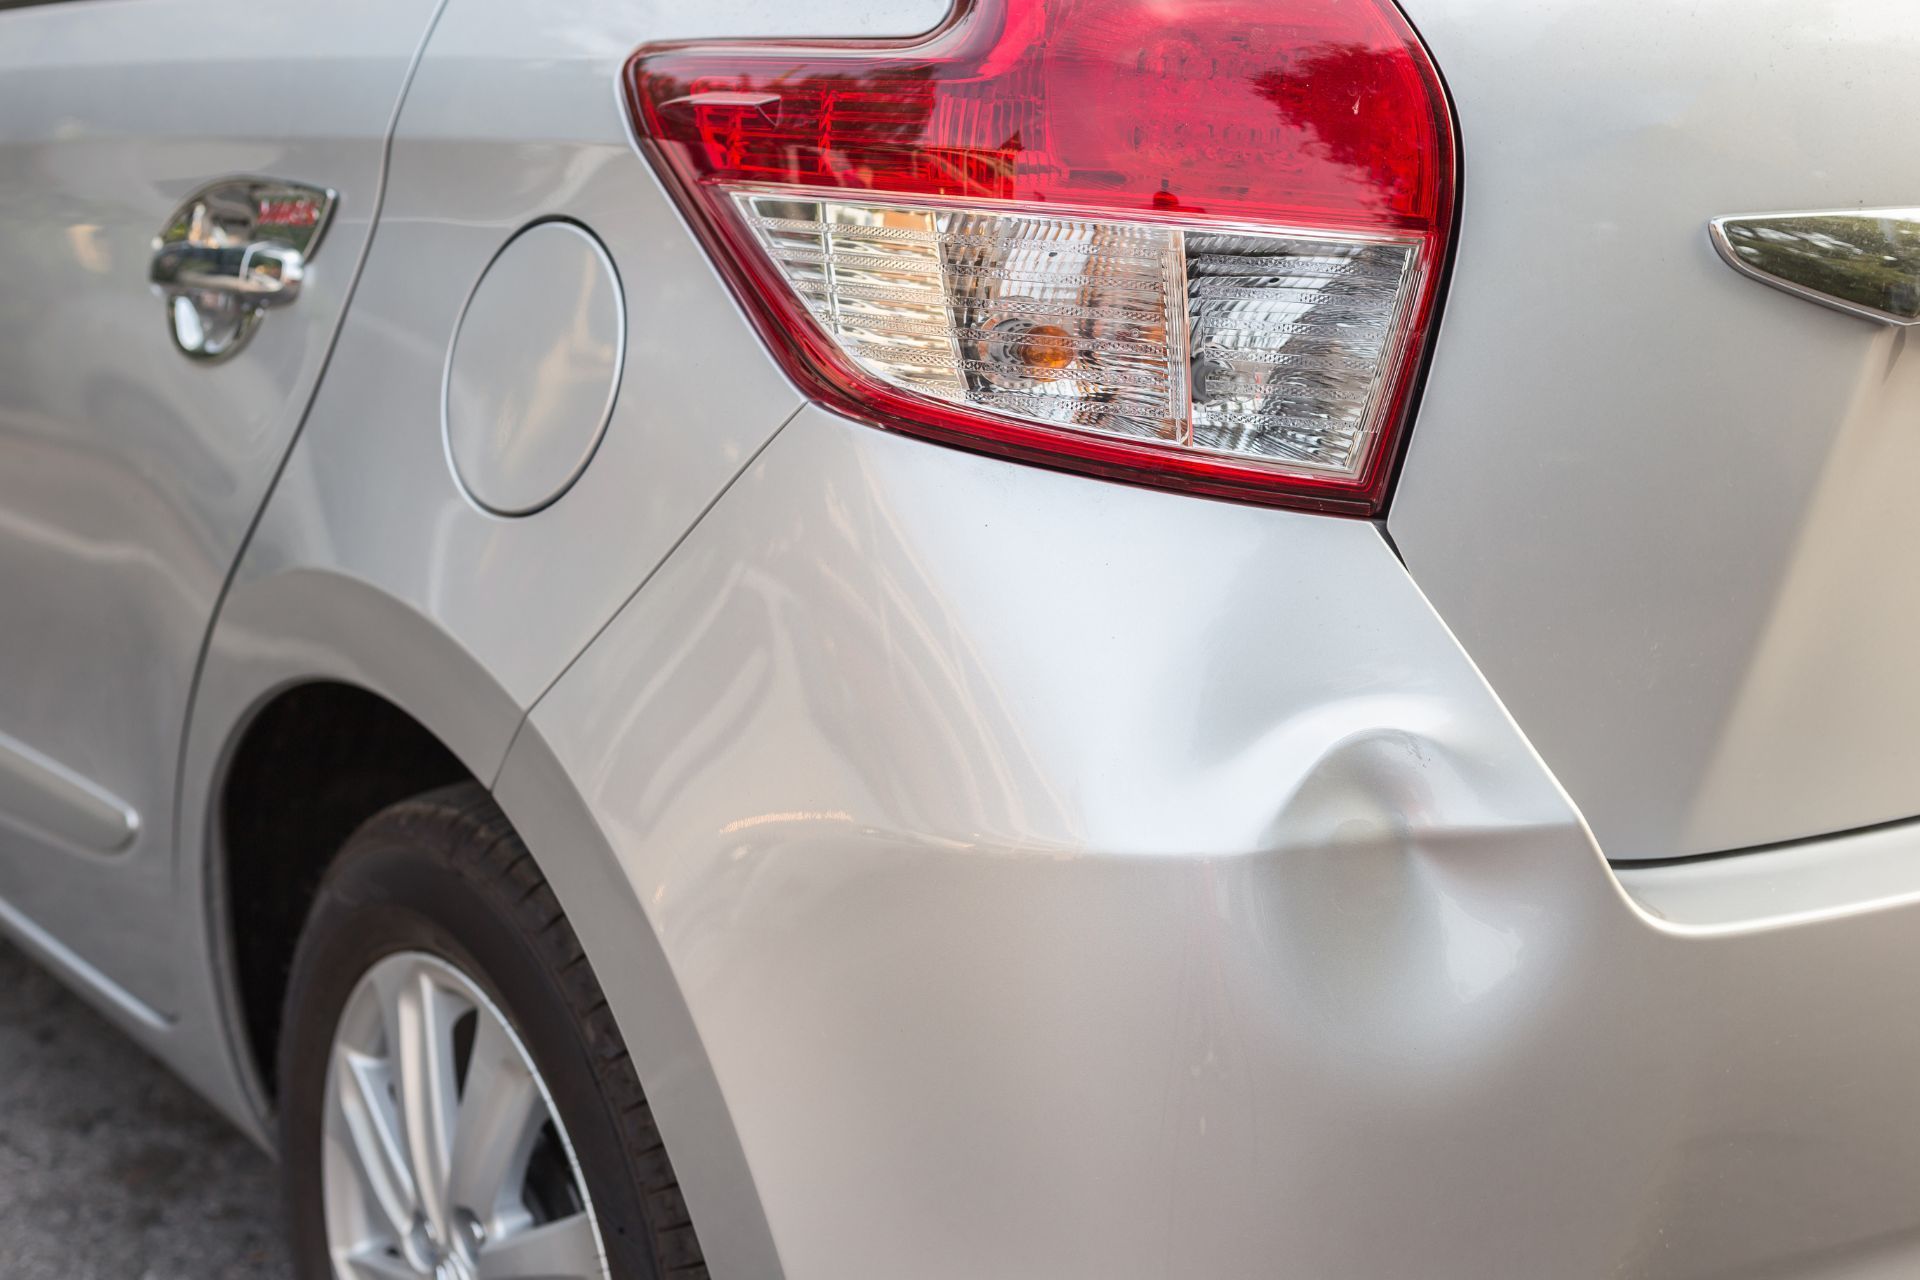 Paintless Dent Repair: What Is It, and How Does It Work?